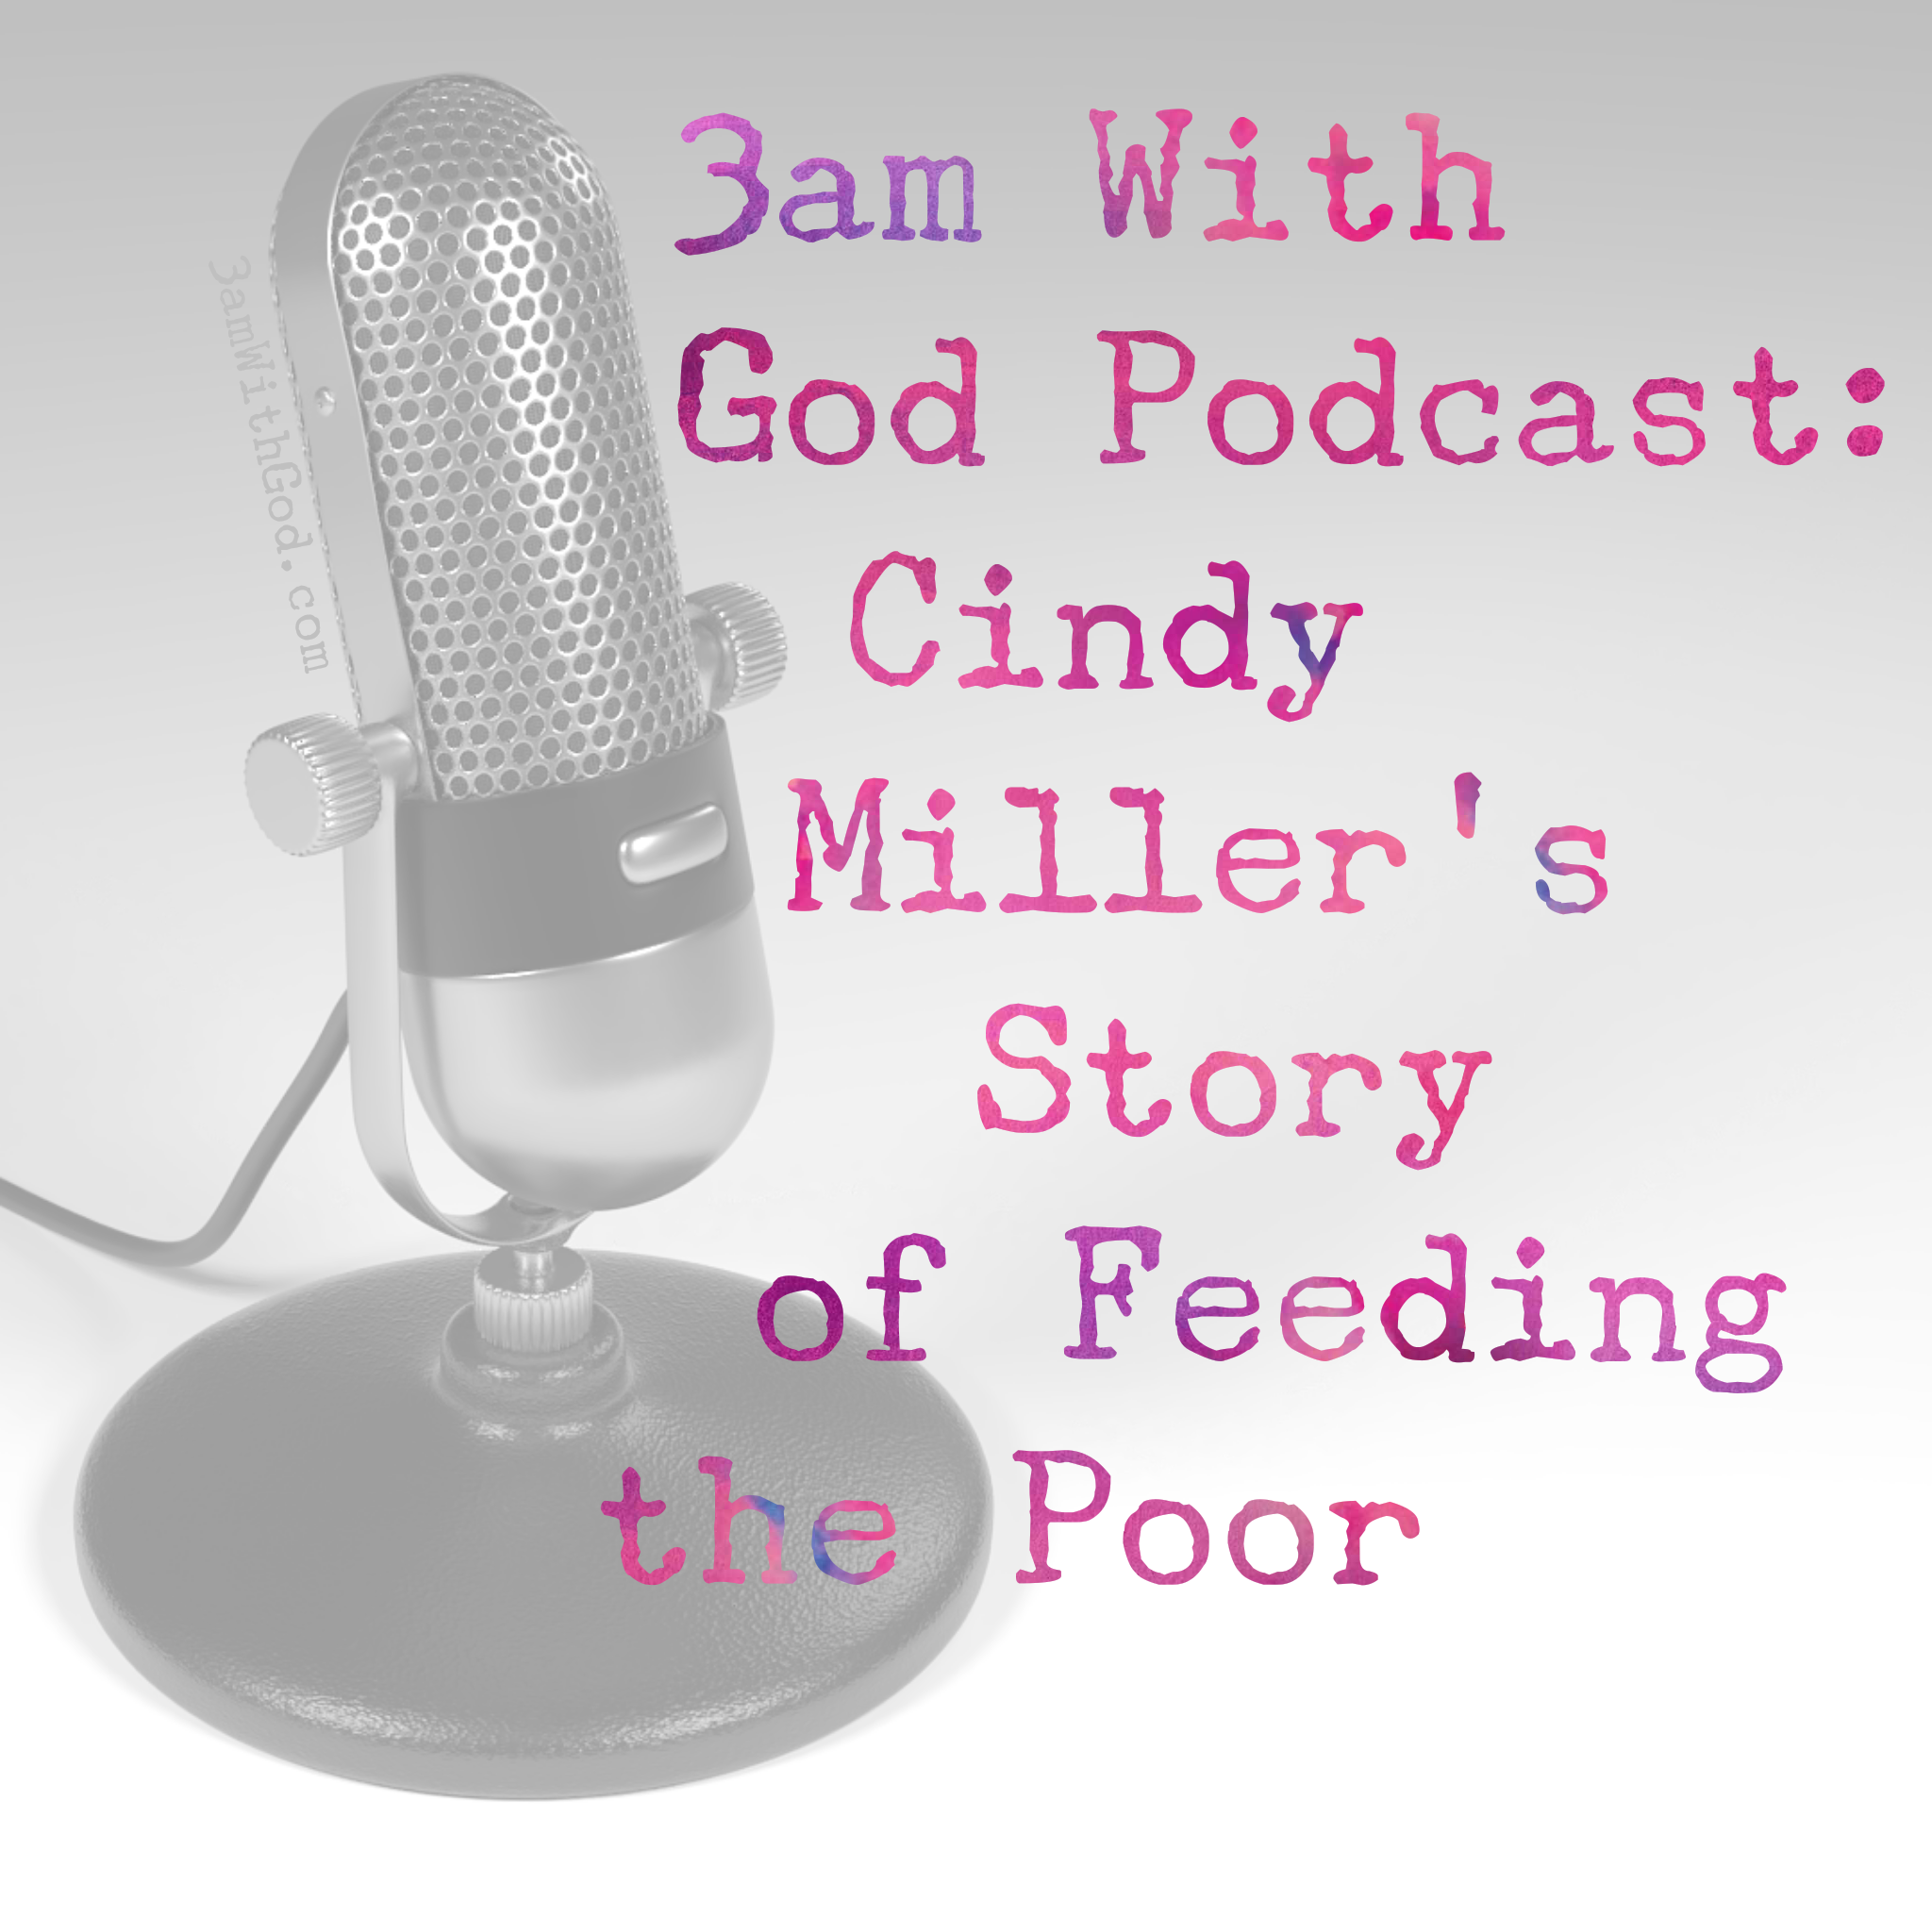 Cindy Miller guest on the 3am With God Podcast